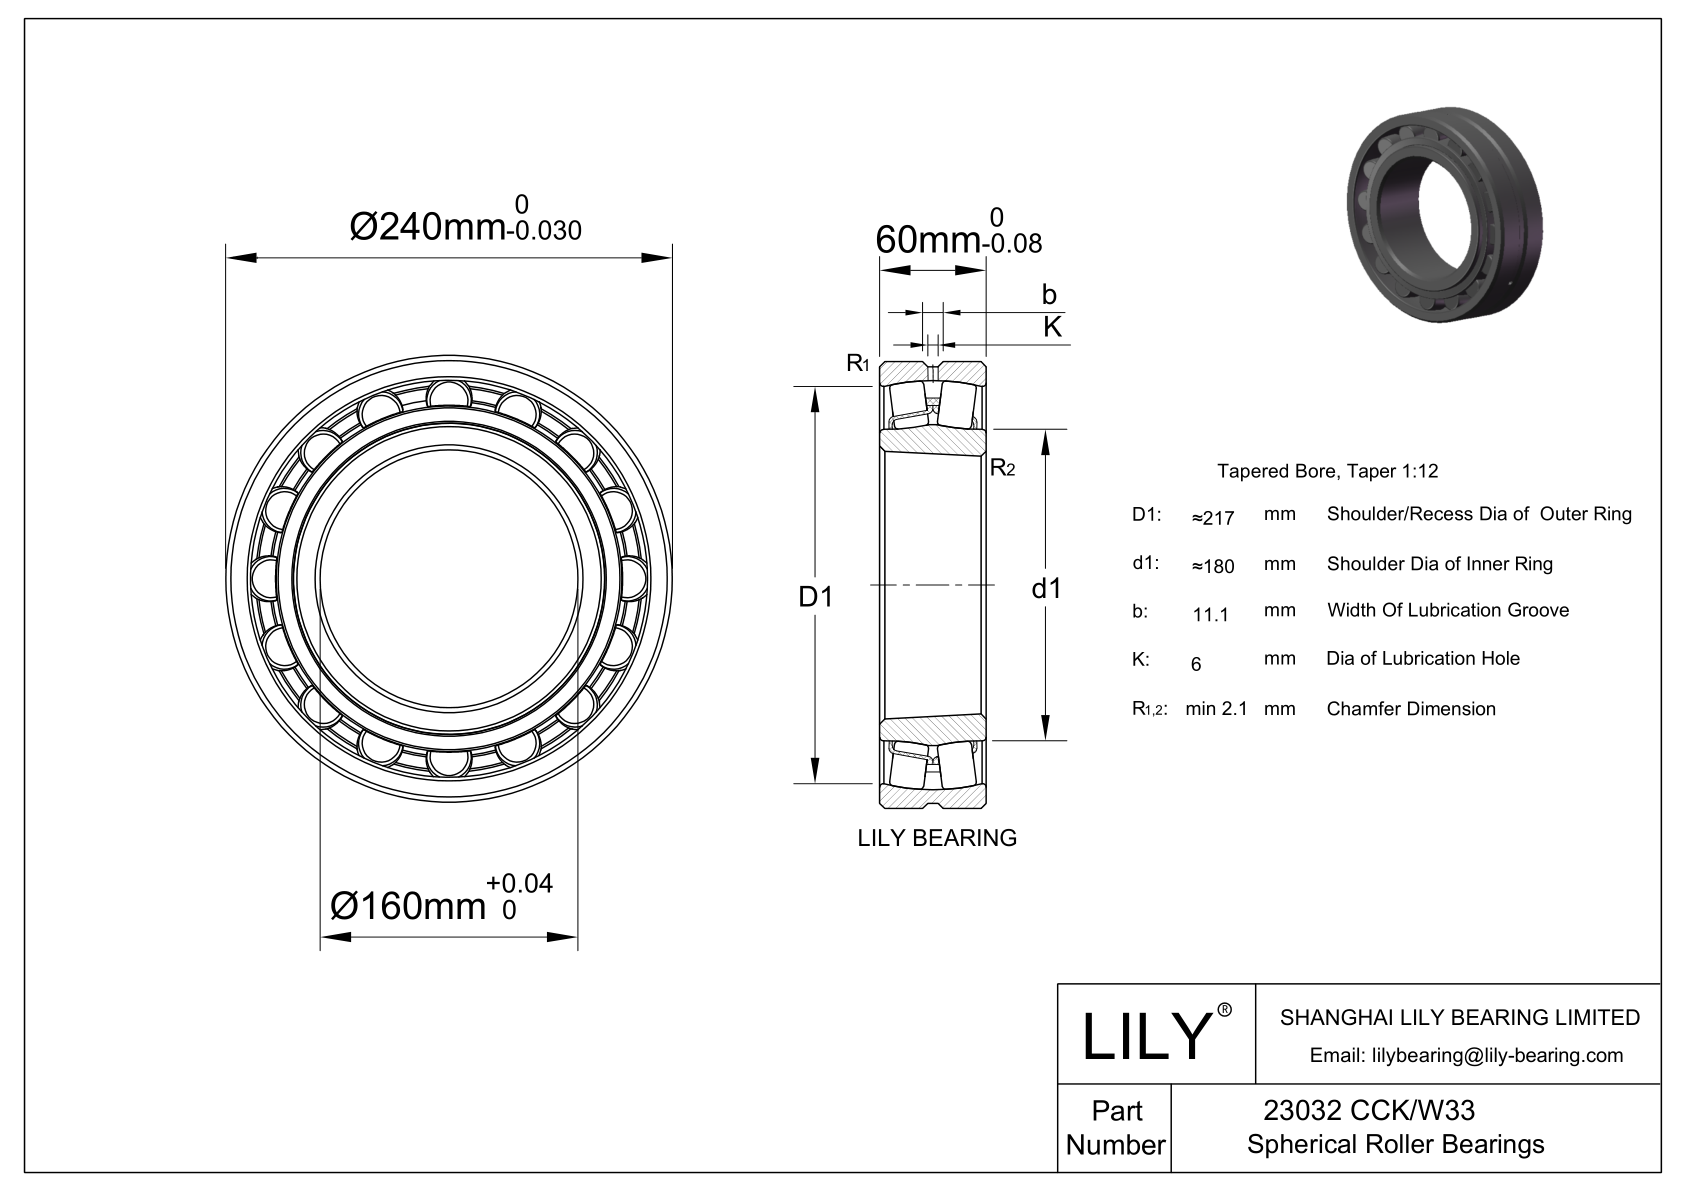 23032 CCK/W33 Double Row Spherical Roller Bearing cad drawing